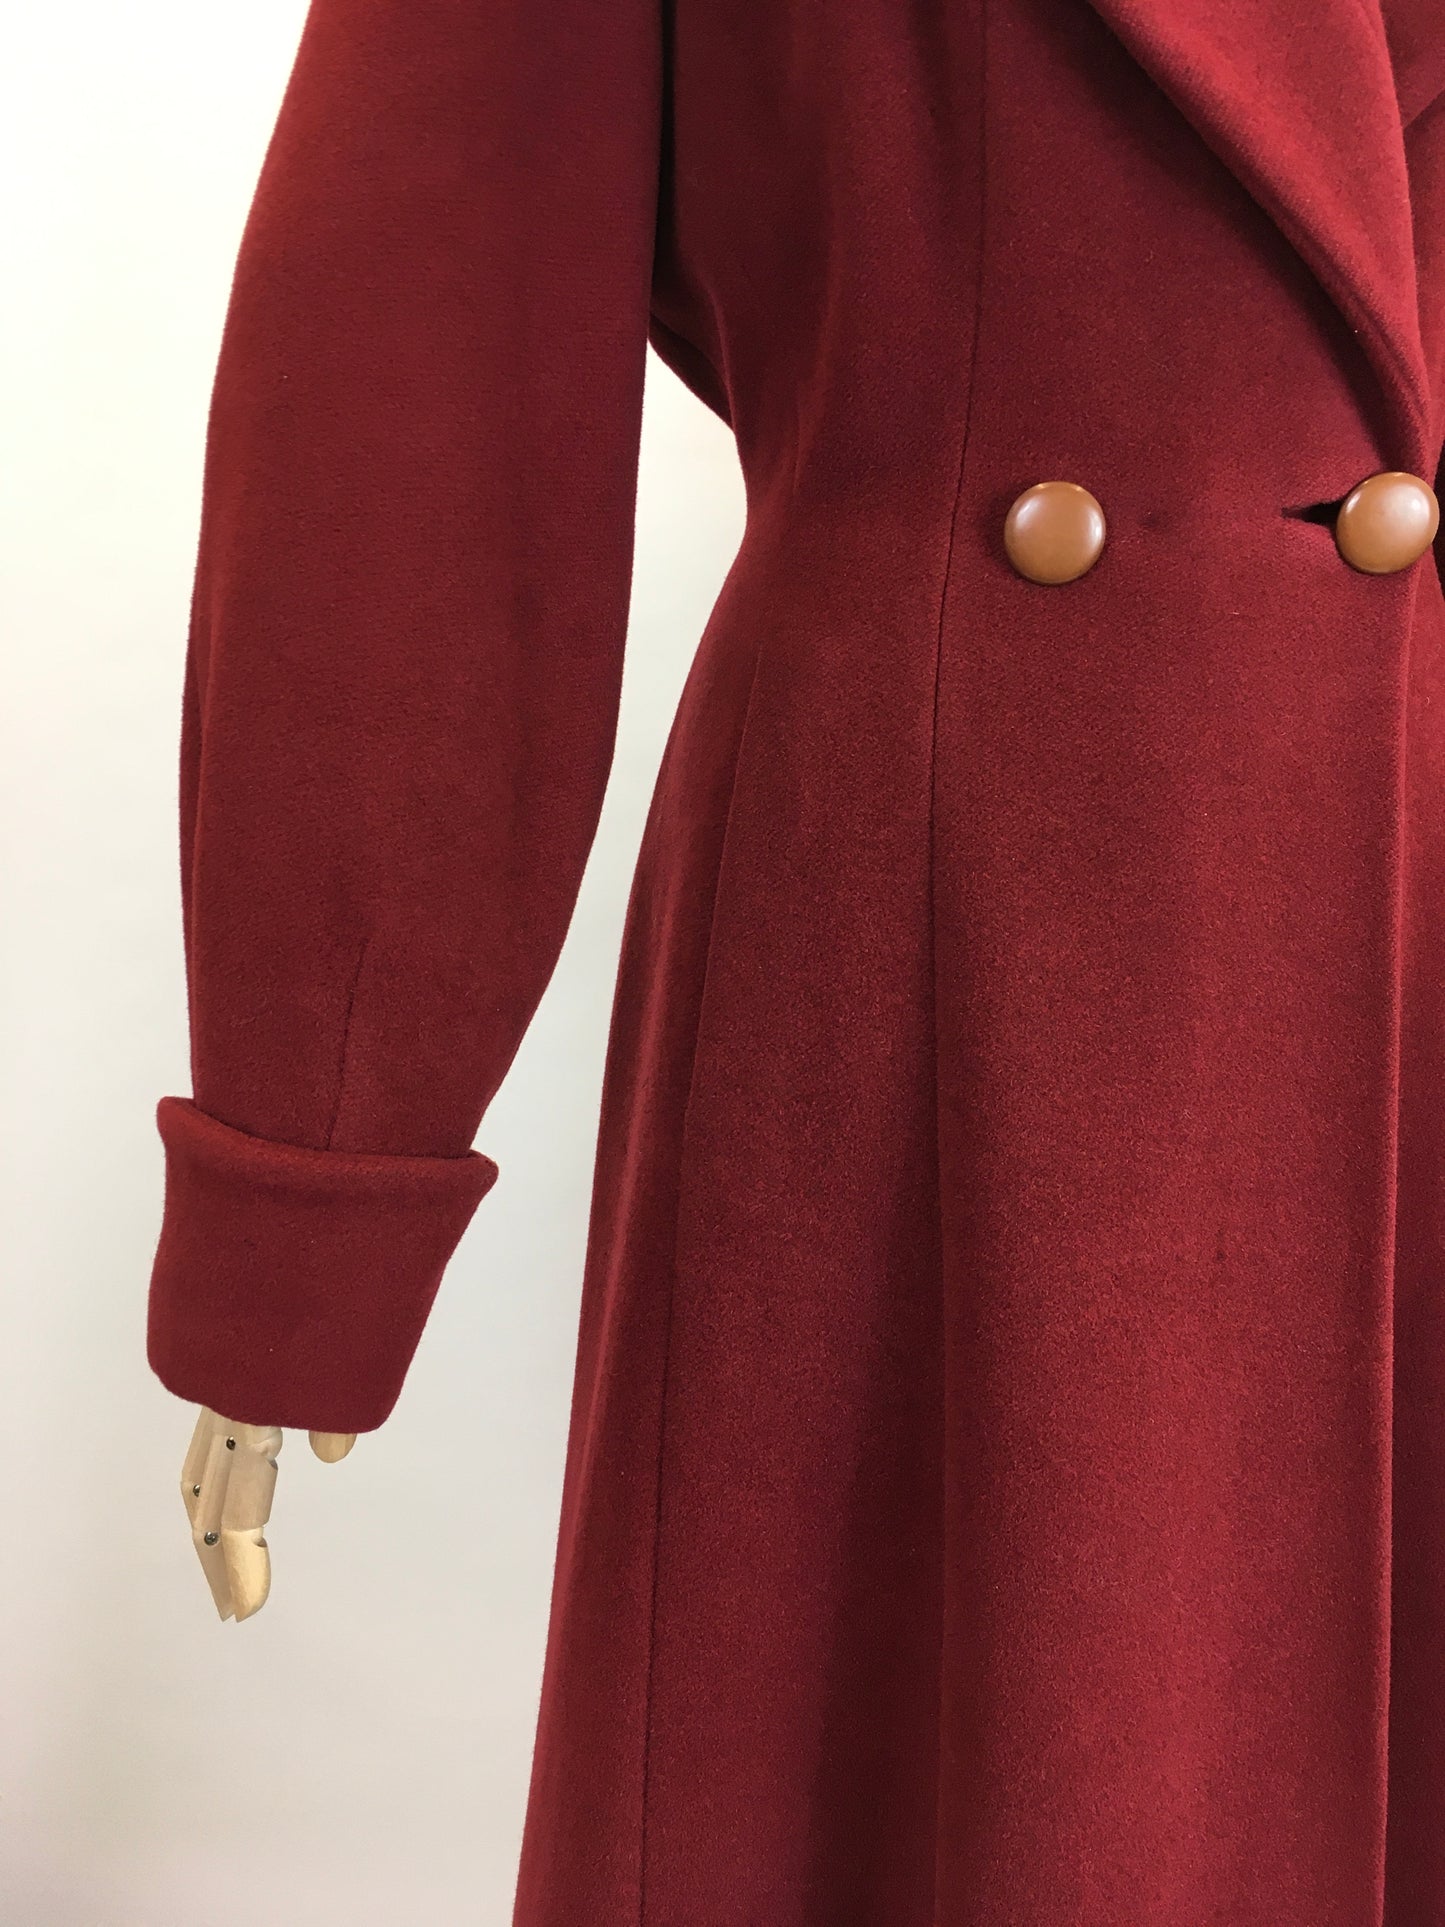 Original 1940’s SENSATIONAL Russet Red Princess Coat - Lovely Shaped Shawl Collar and Cuffs